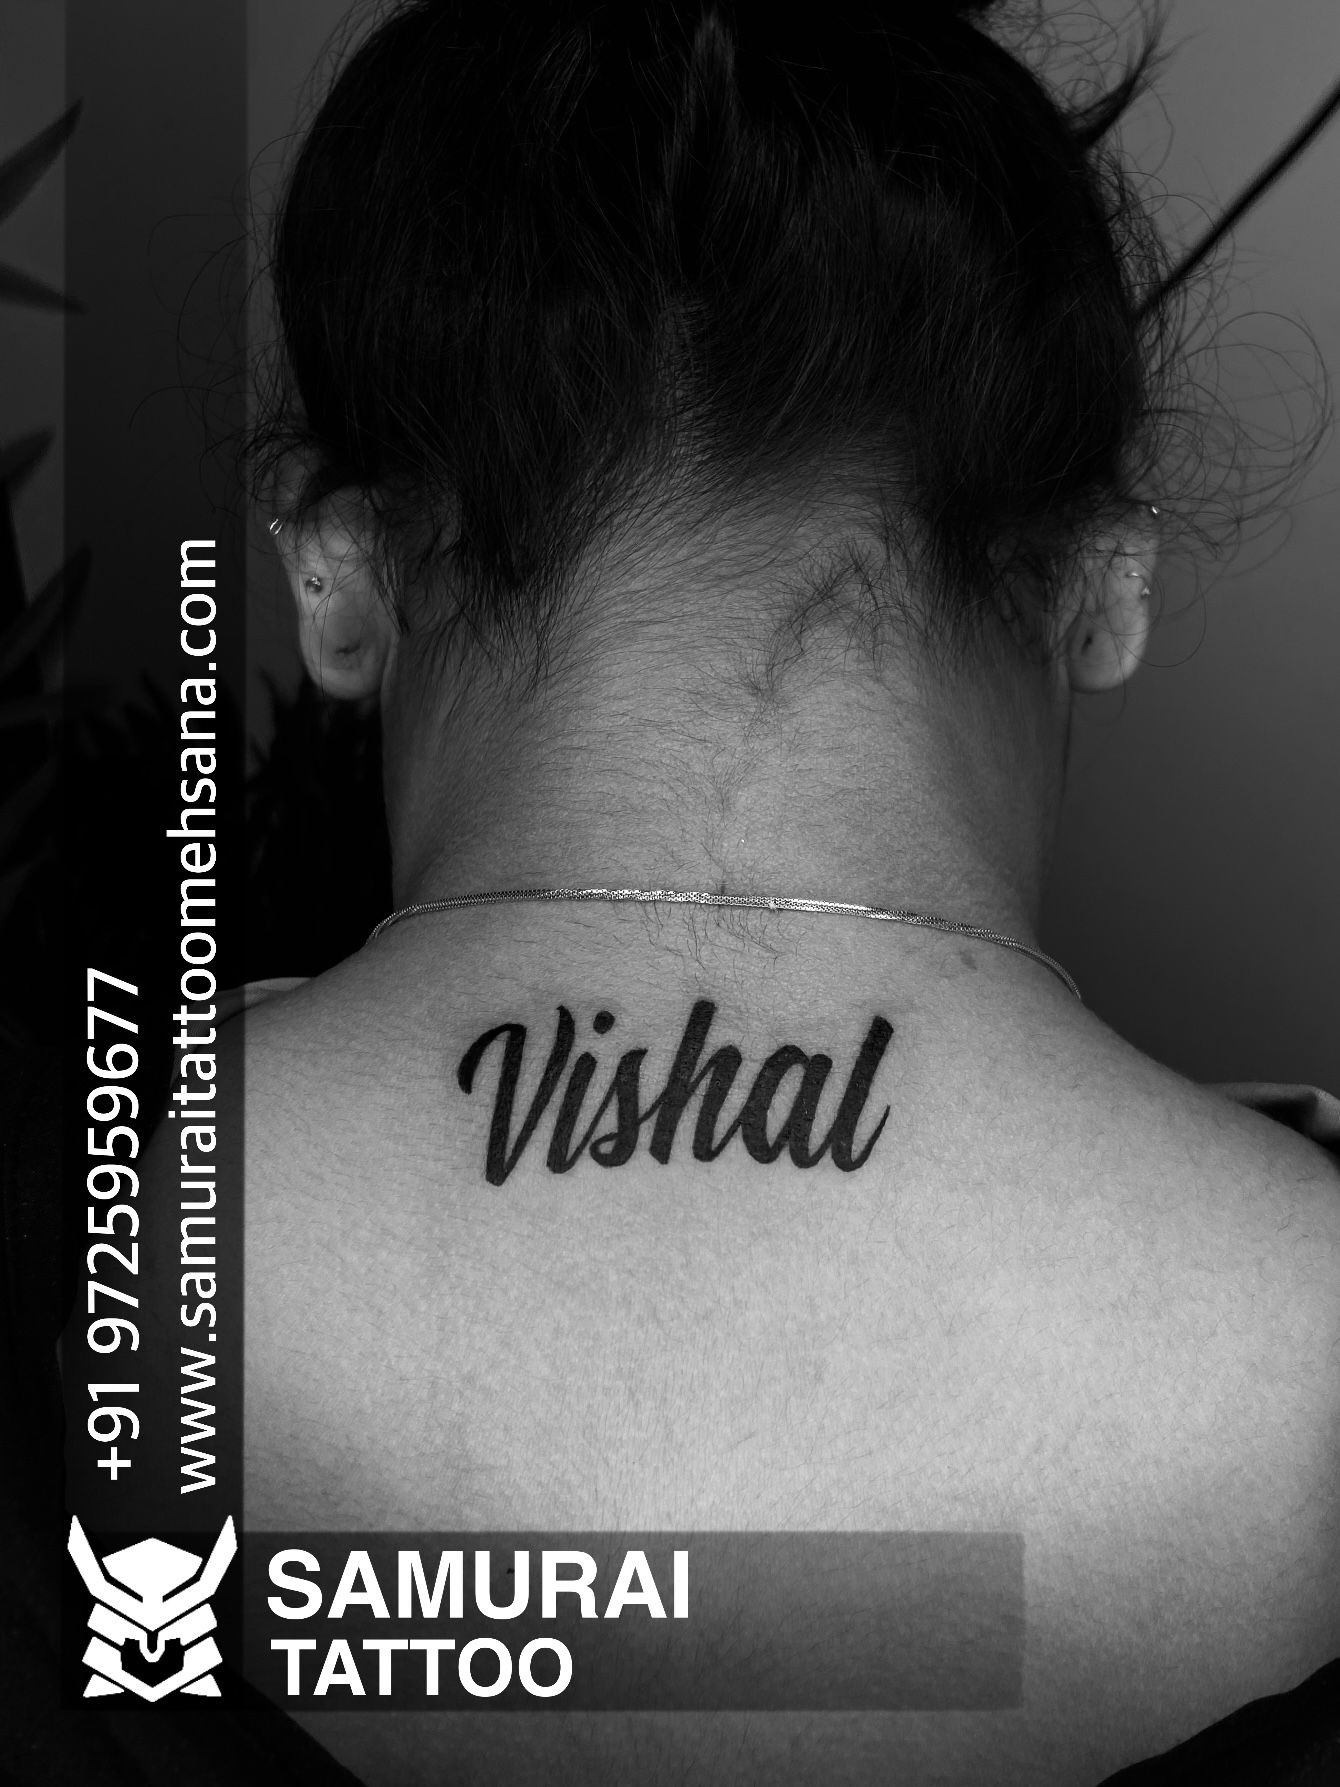 Tattoo uploaded by Aliens Tattoo • Rein nest eternet- Nothing Last Forever.  Checkout this amazing Script tattoo by Vishal Maurya at Aliens Tattoo. If  you wish to get these amazing tattoos visit